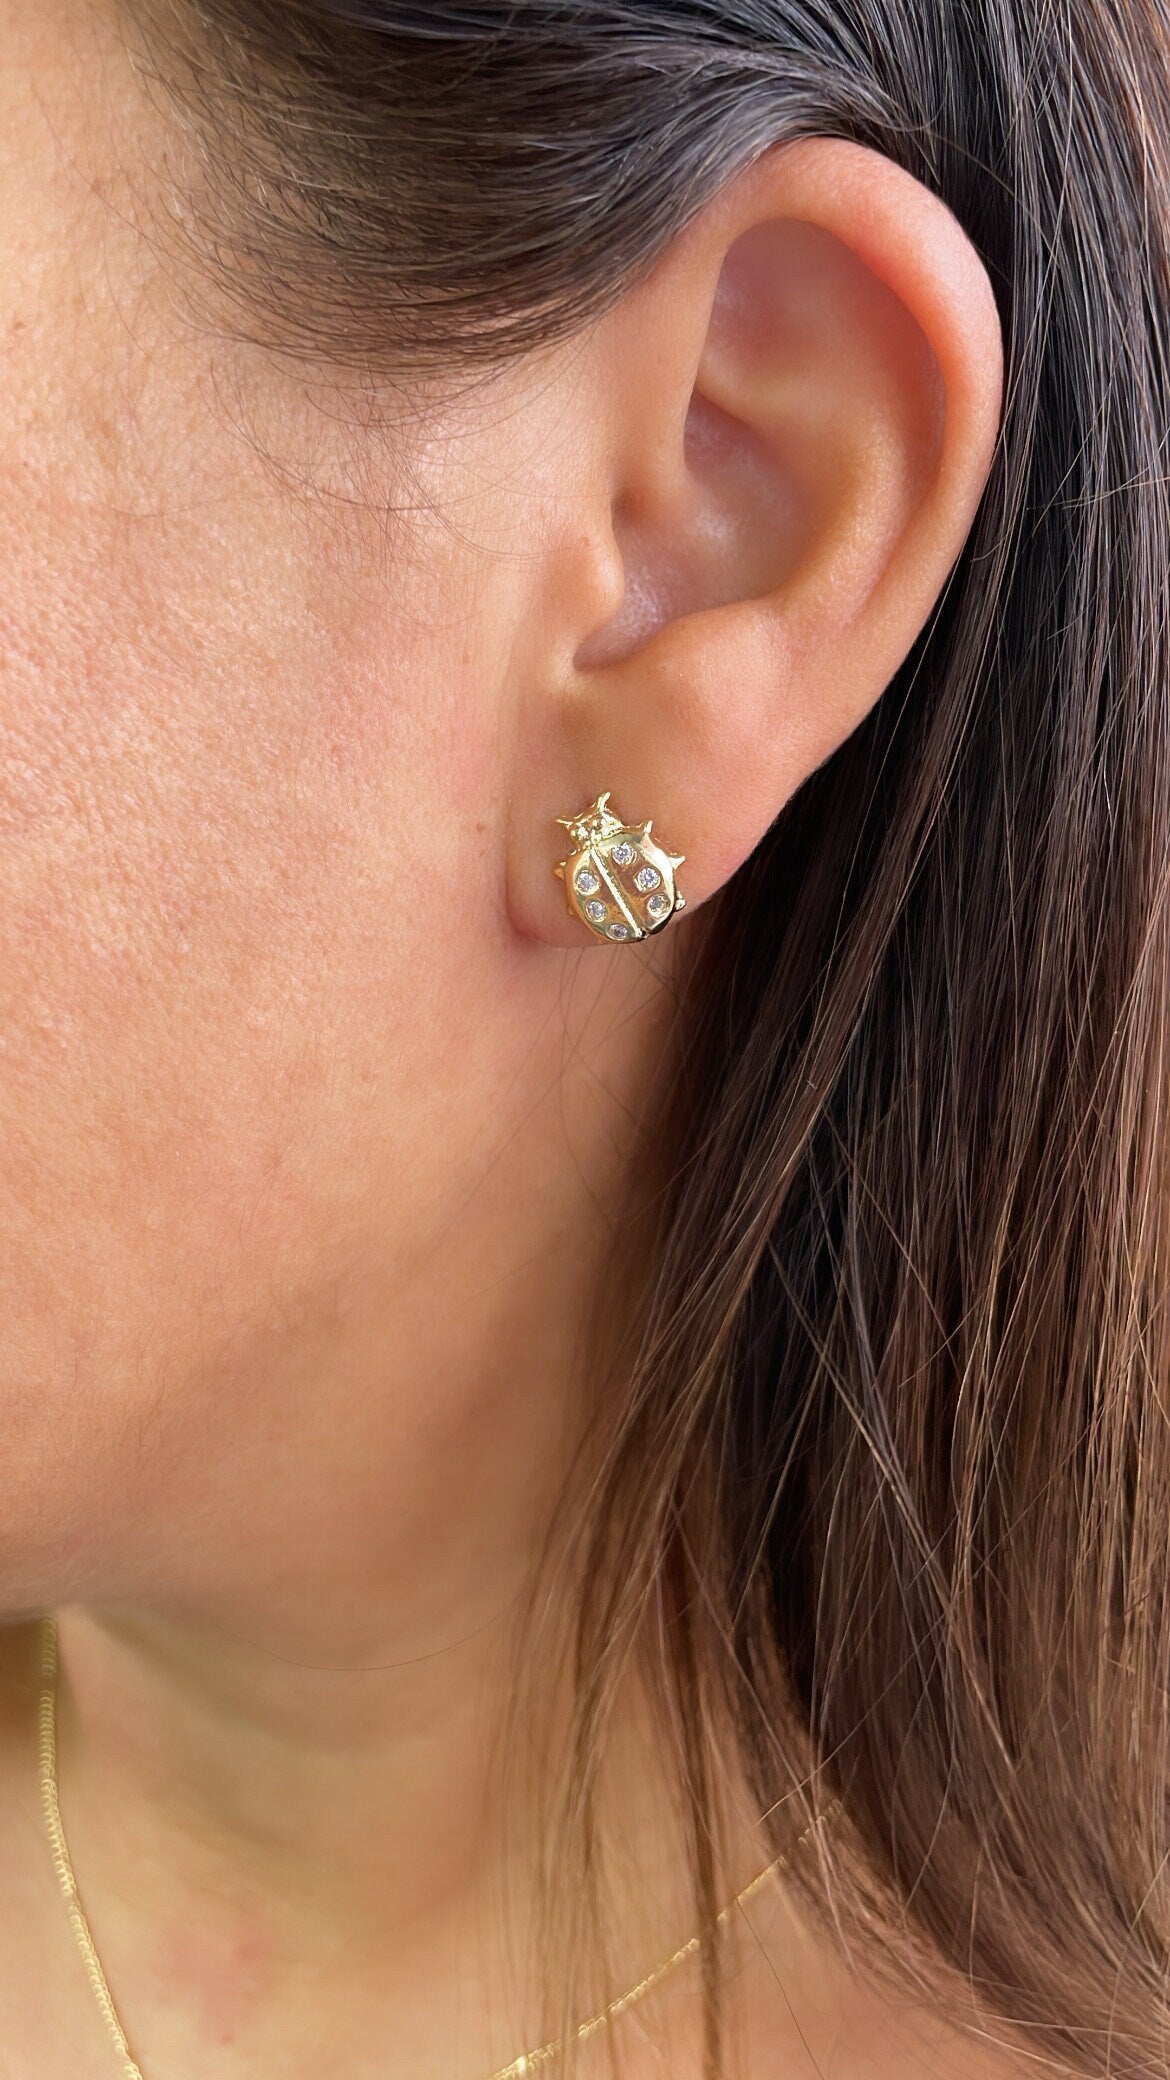 18k Gold Filled Plain XL Lady Bug Stud Earring With CZ Patterned Studs